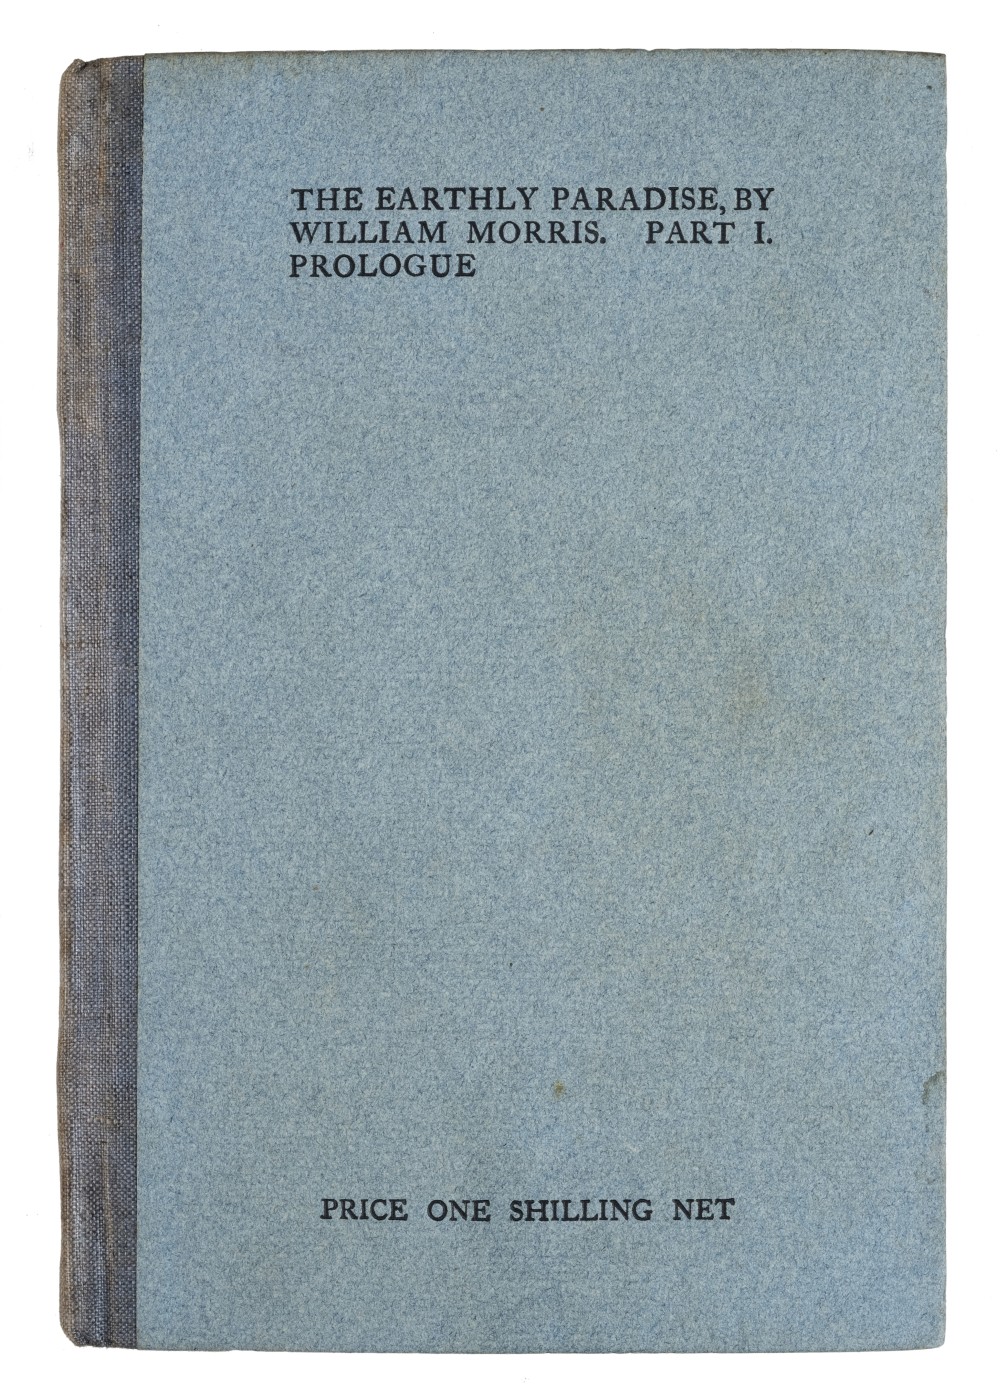 Morris (William). The Earthly Paradise: A Poem, 12 volumes, Longmans, 1905, minor spotting to